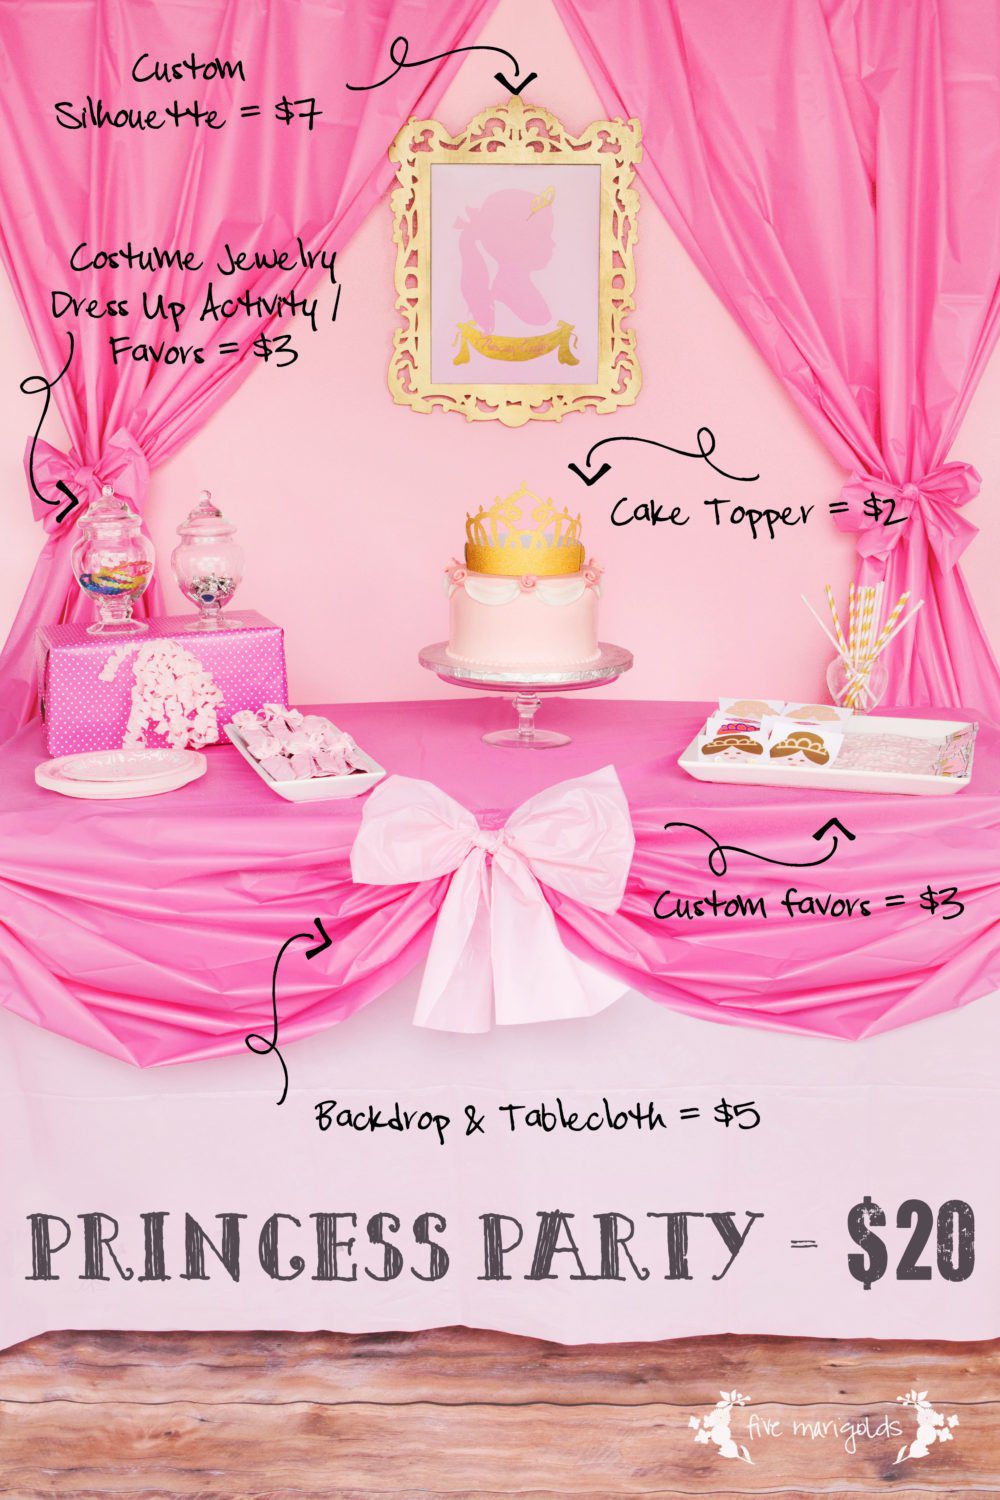 DIY Complete Pink Princess Birthday Party $20 Favors + Table Setting | www.fivemarigolds.com